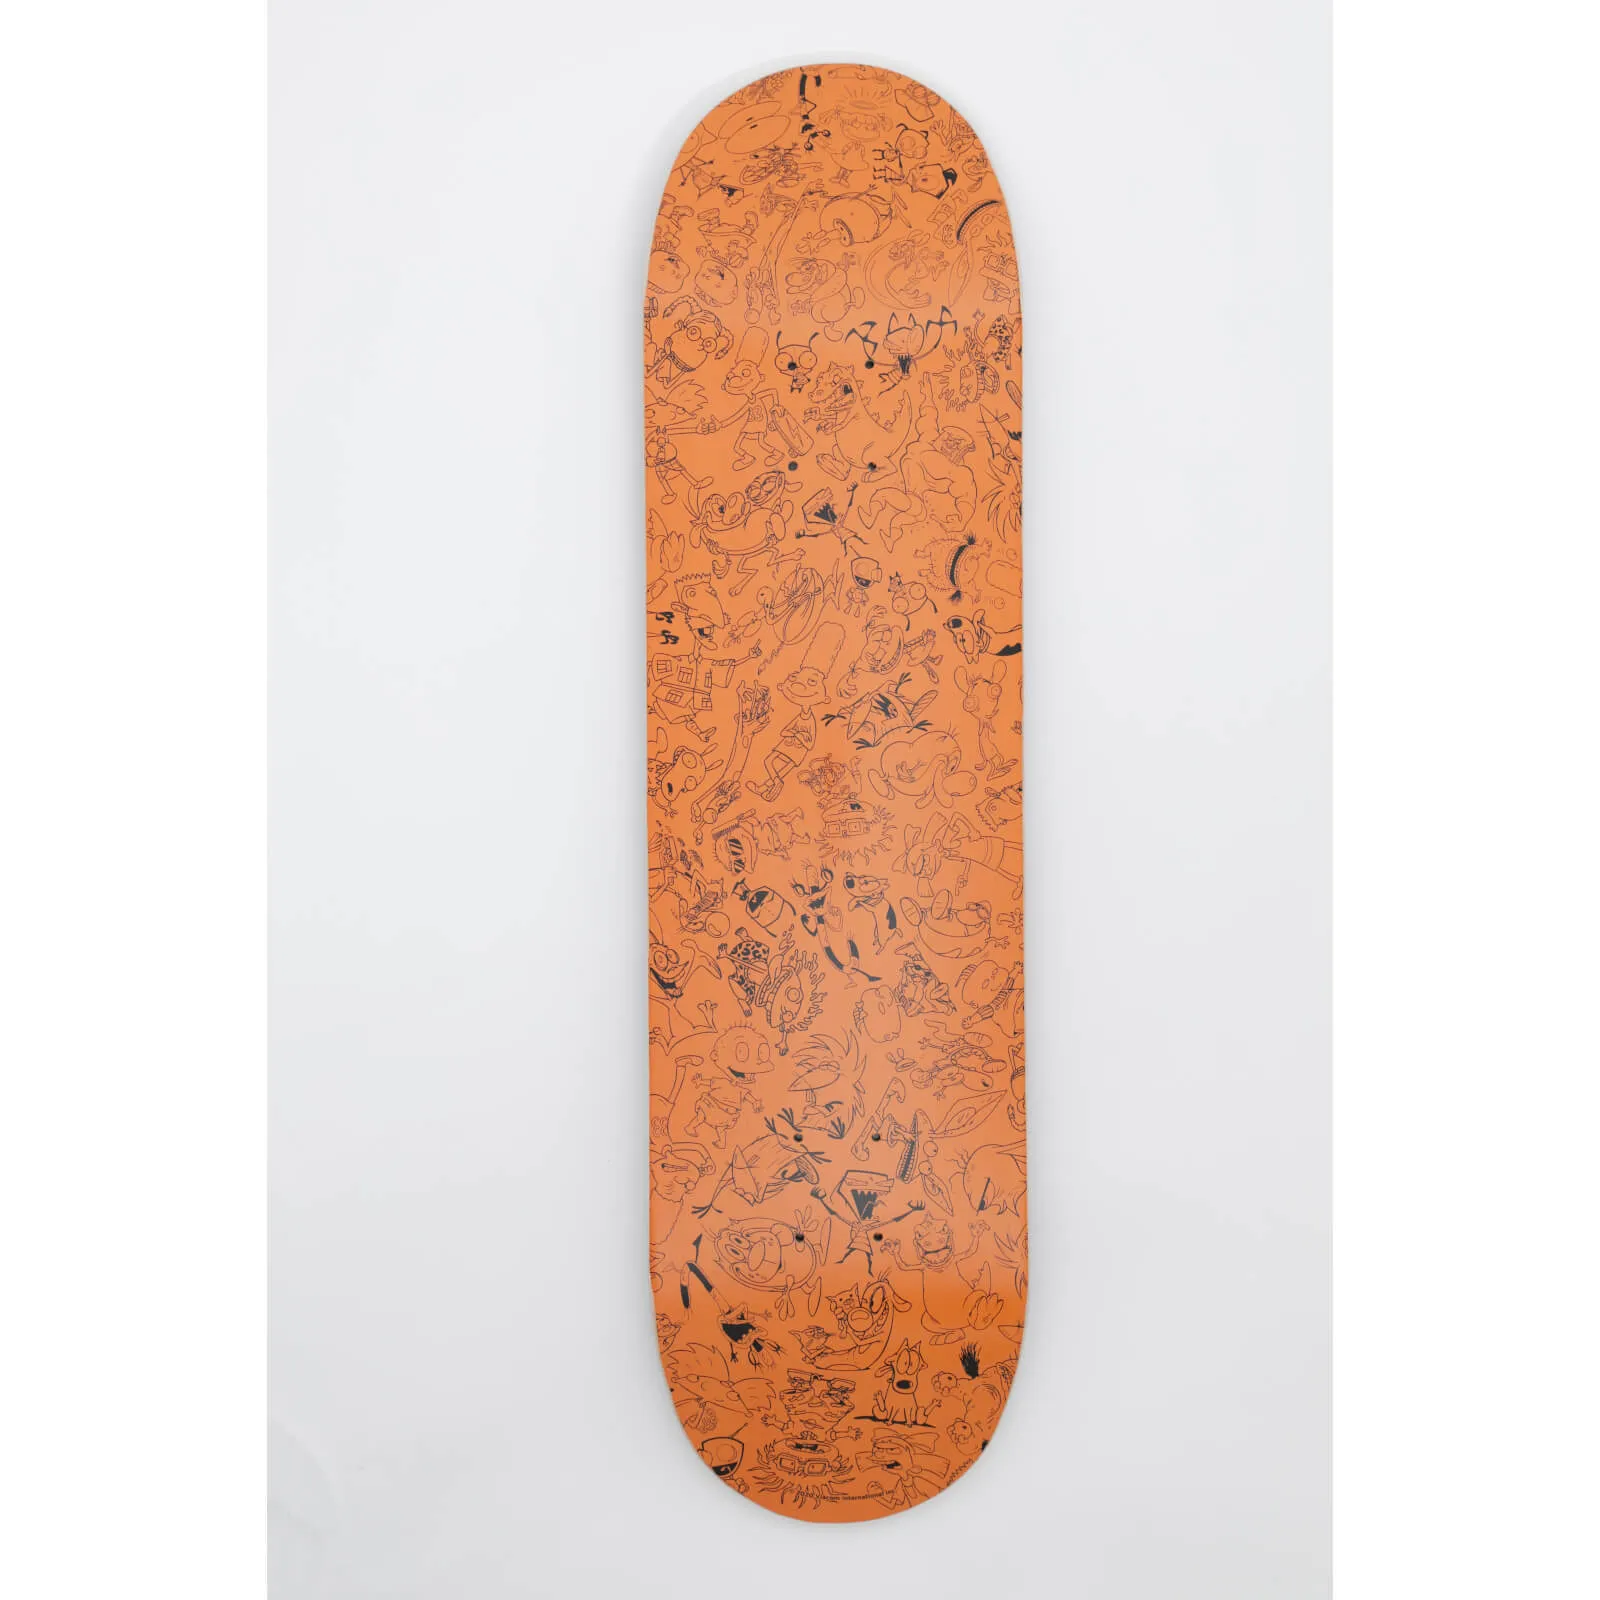  DUST! Exclusive Skateboard Deck - Limited to 500 pieces only